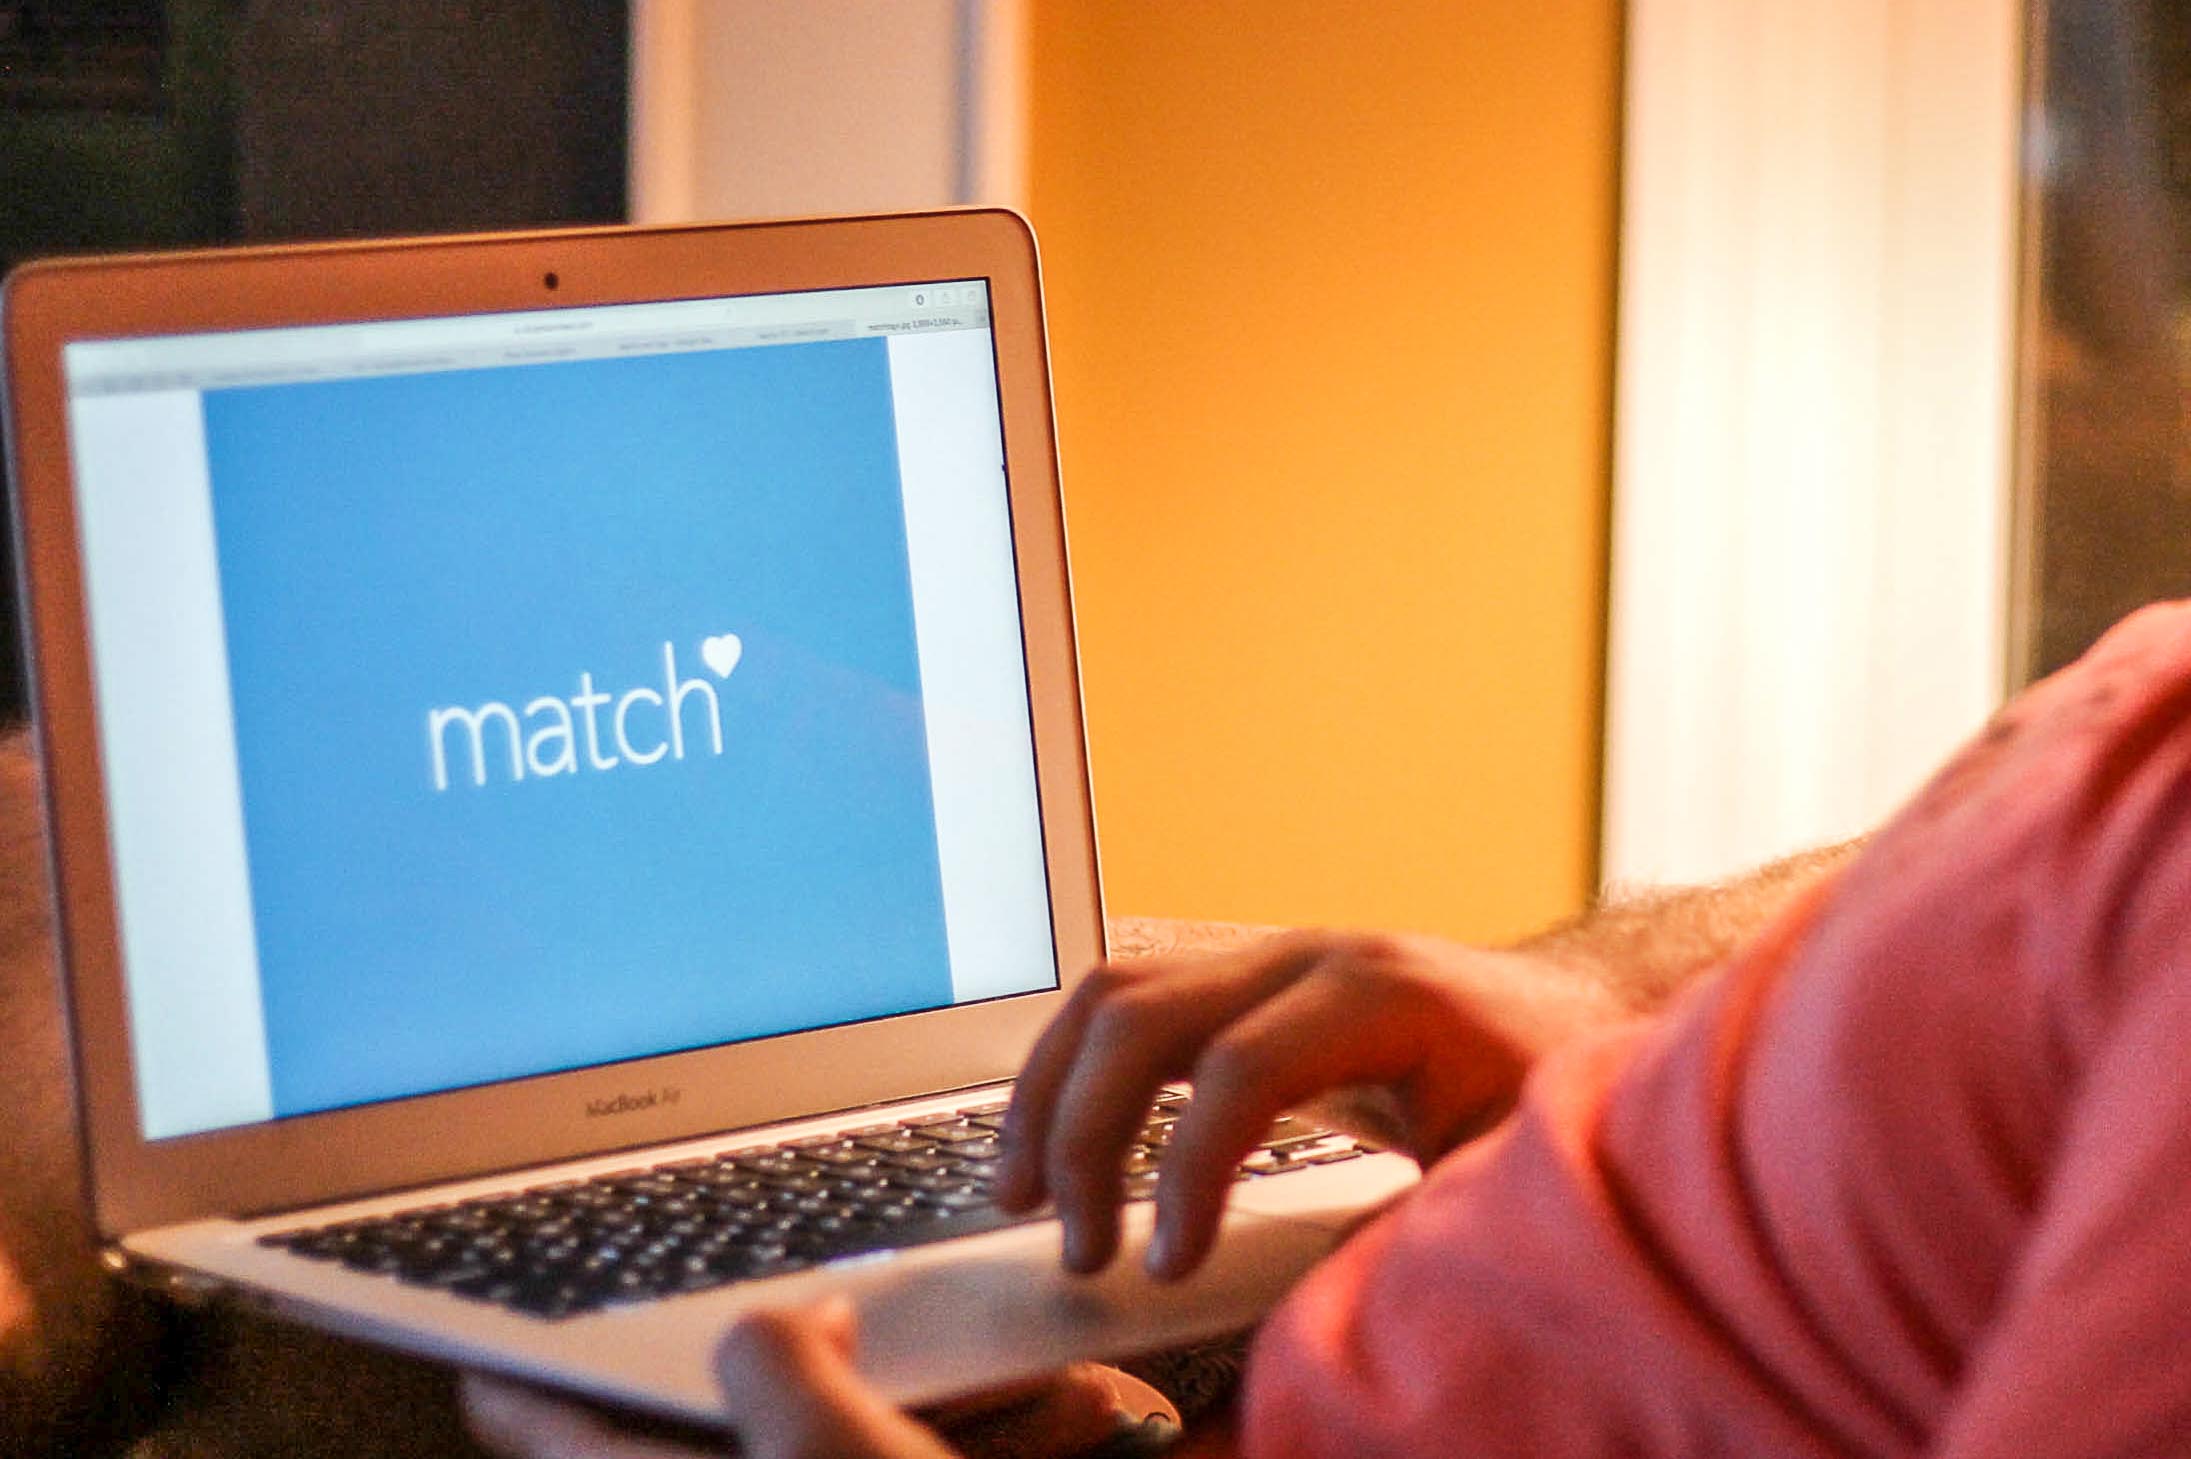 Opinion: Skeptics should give online dating a chance